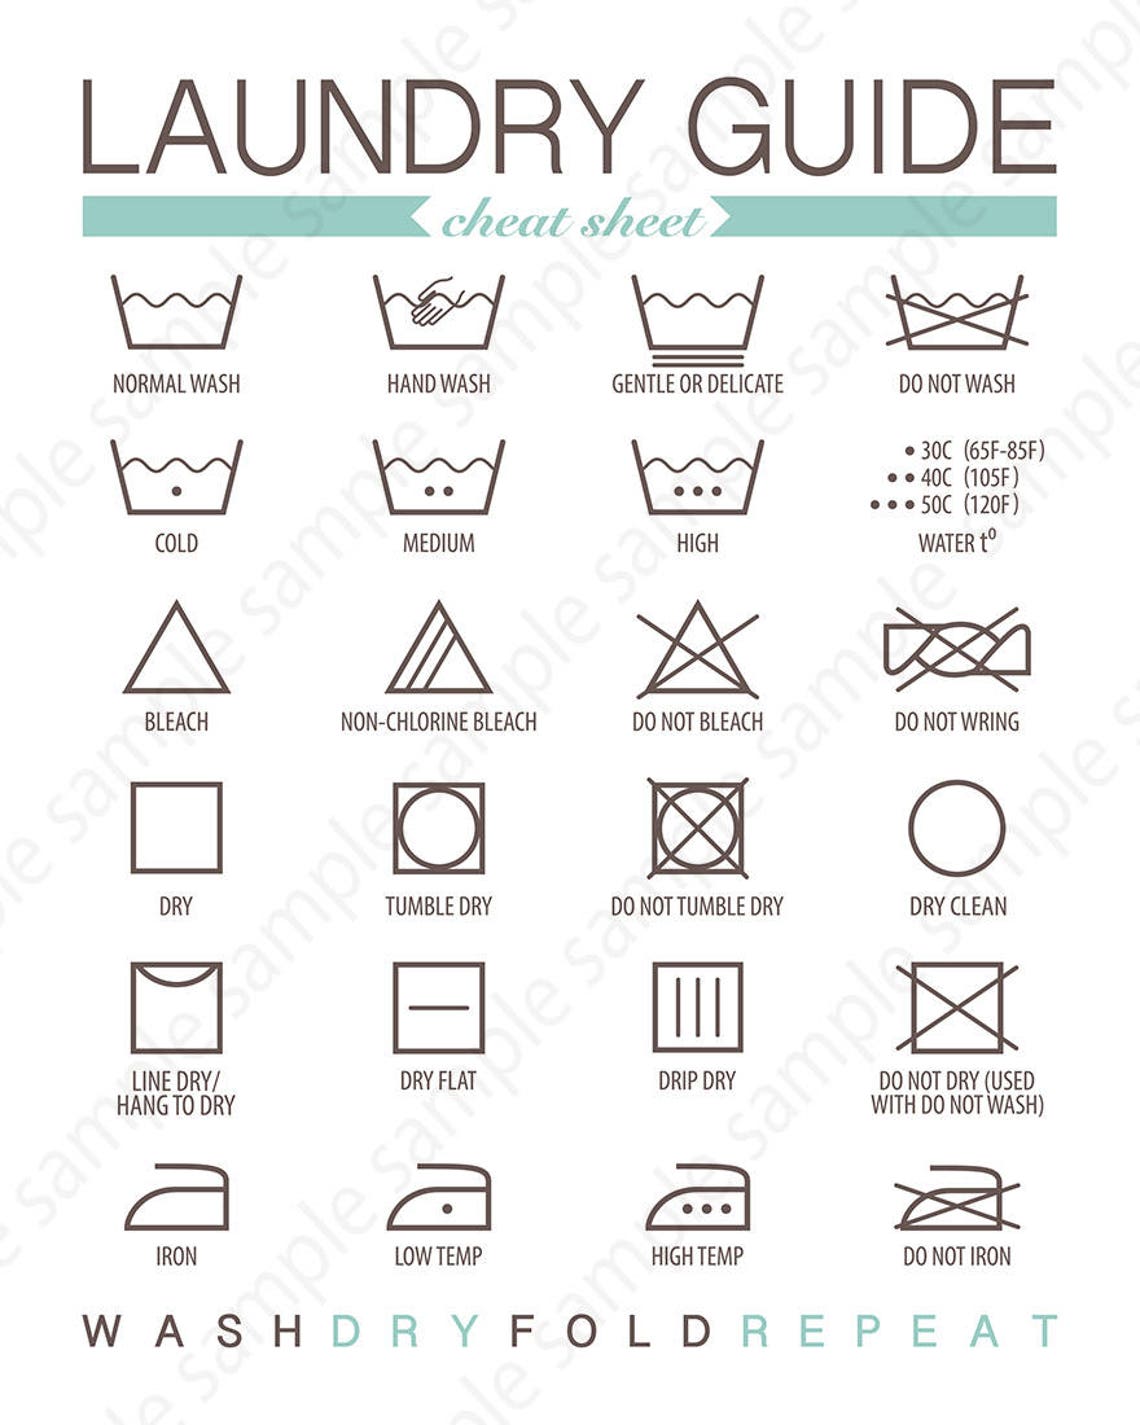 Printable Laundry guide for Laundry Room decor 8x10 11x14 | Etsy